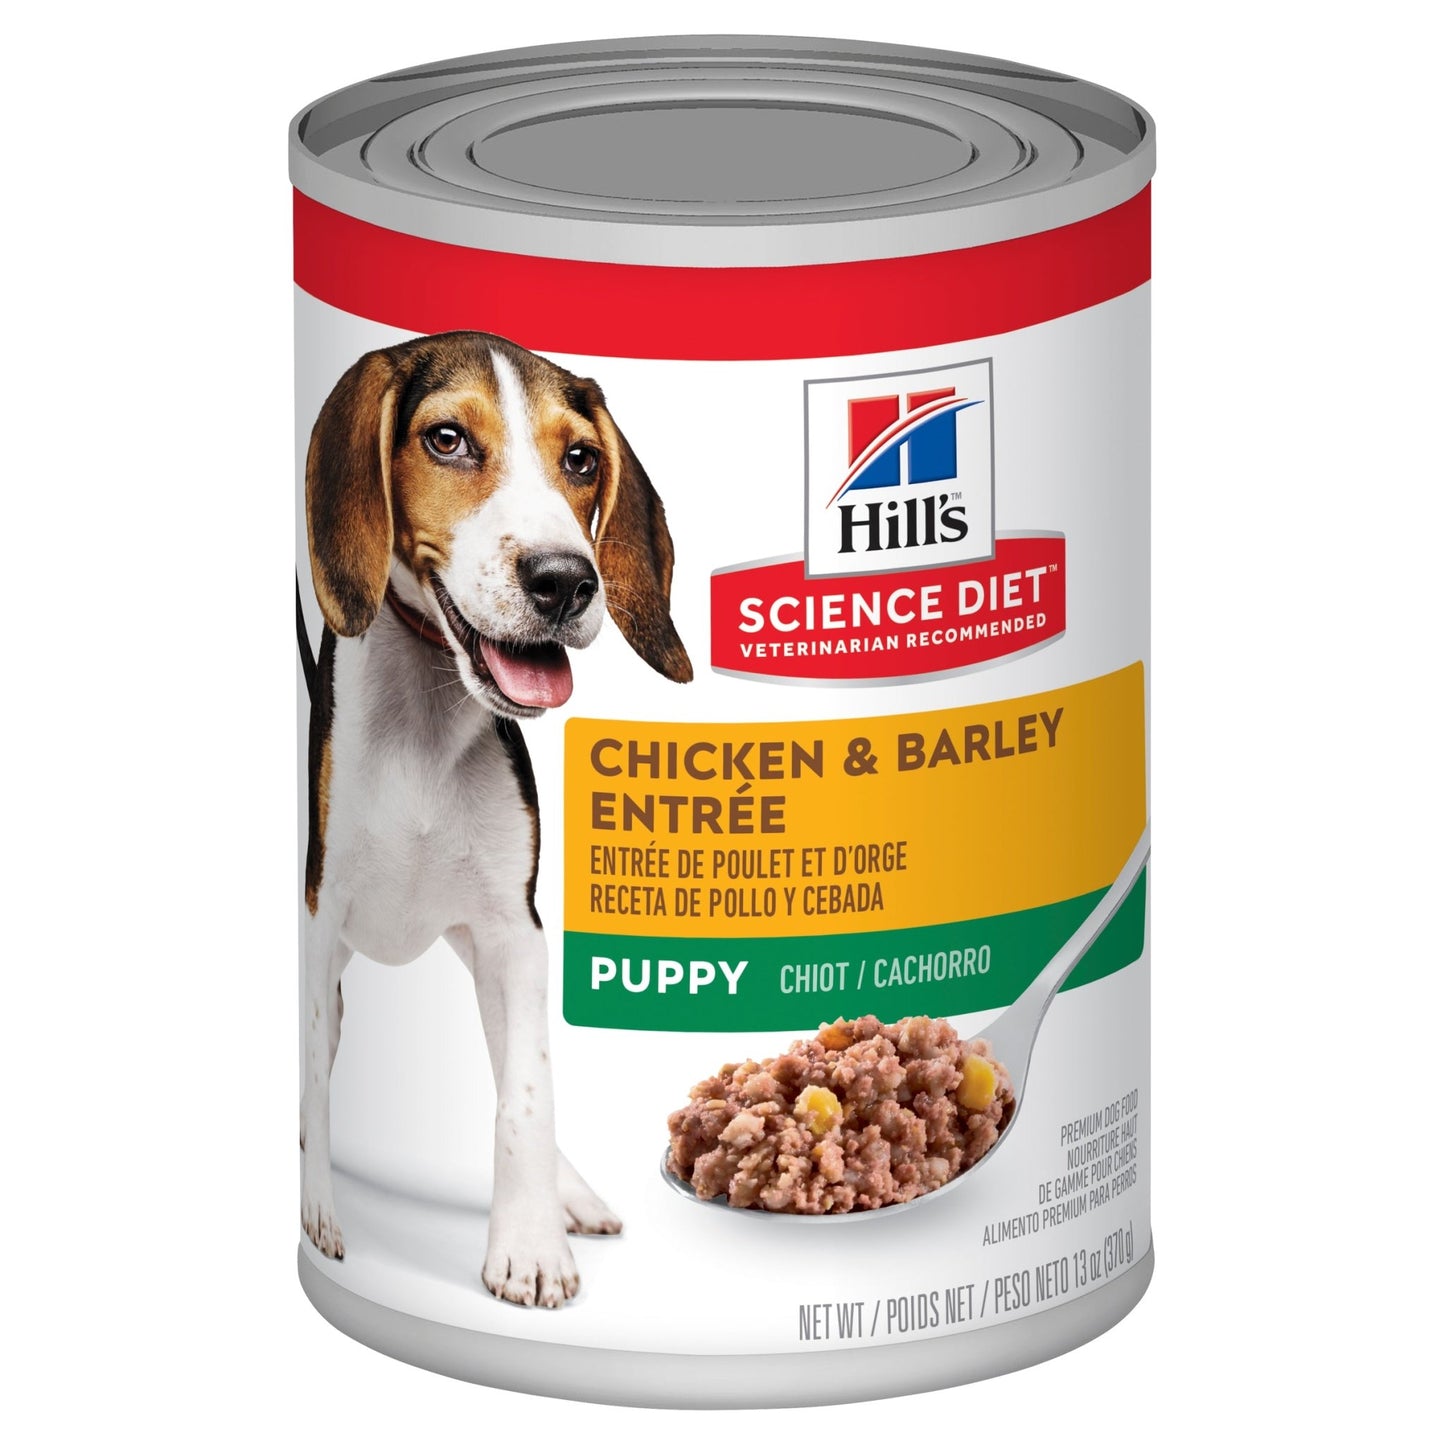 Hill's Science Diet Puppy Chicken & Barley Entrée Canned Dog Food 370g - Woonona Petfood & Produce